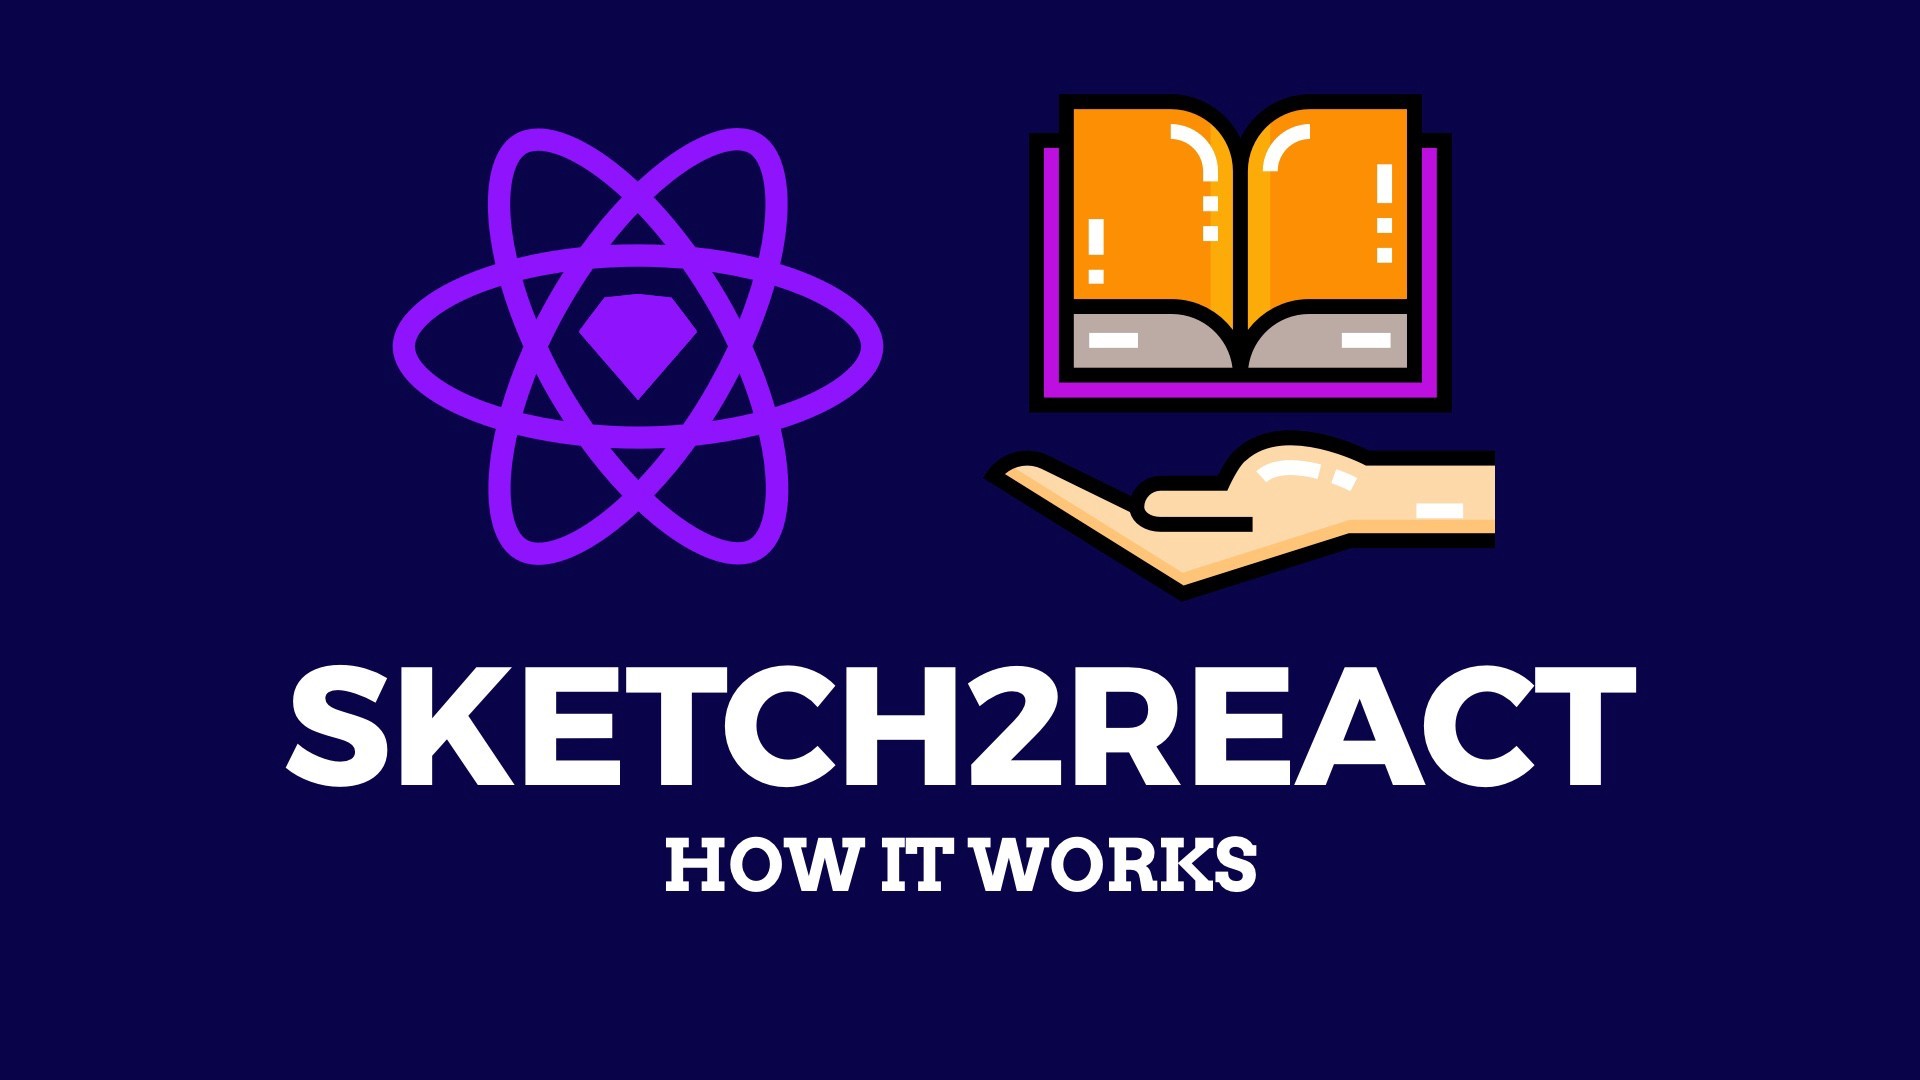 1920x1080 Sketch2React — How it works (January 2019 Version)